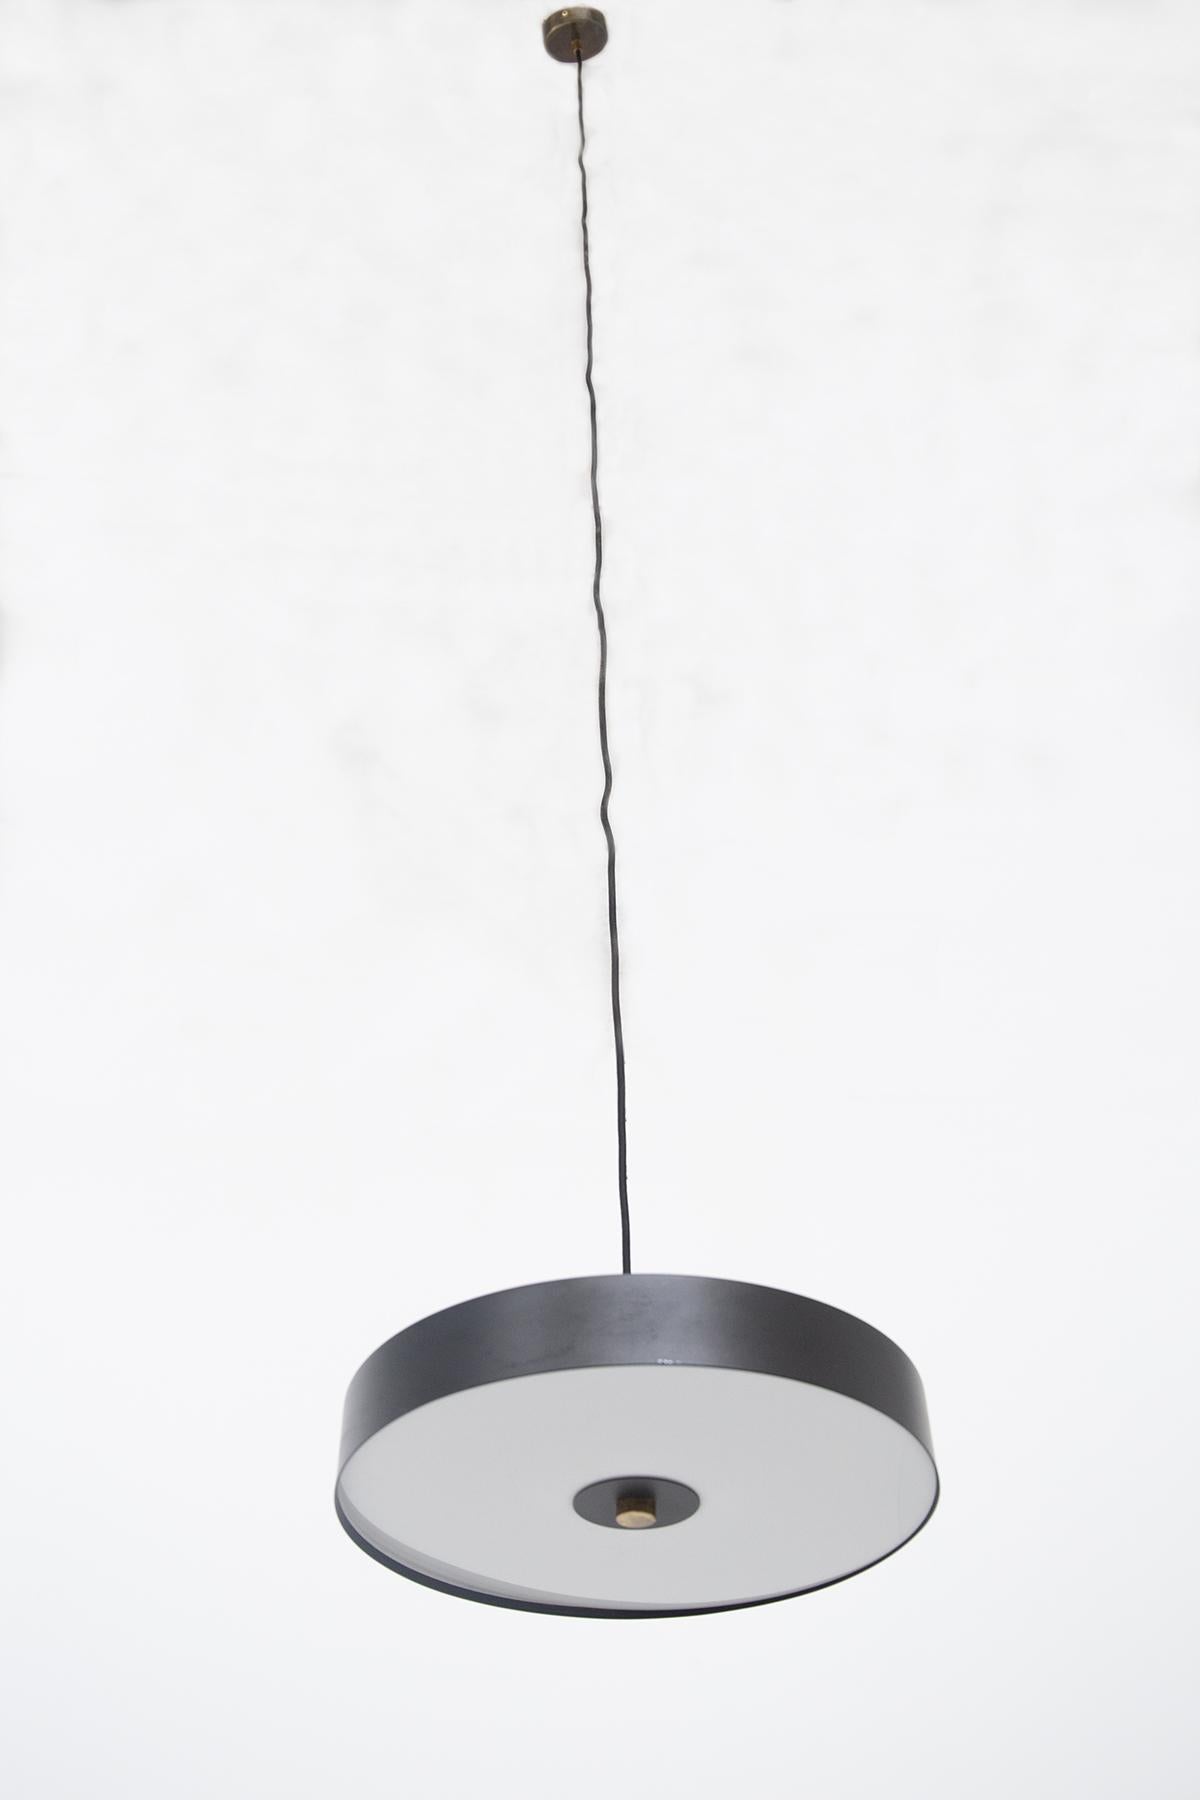 Gorgeous vintage ceiling lamp made in the 2000s.
The ceiling lamp is made of black aluminum and has a round shape, very beautiful and elegant.
The lamp has a brass insert that connects it to the wire, as well as the round plate that fixes it to